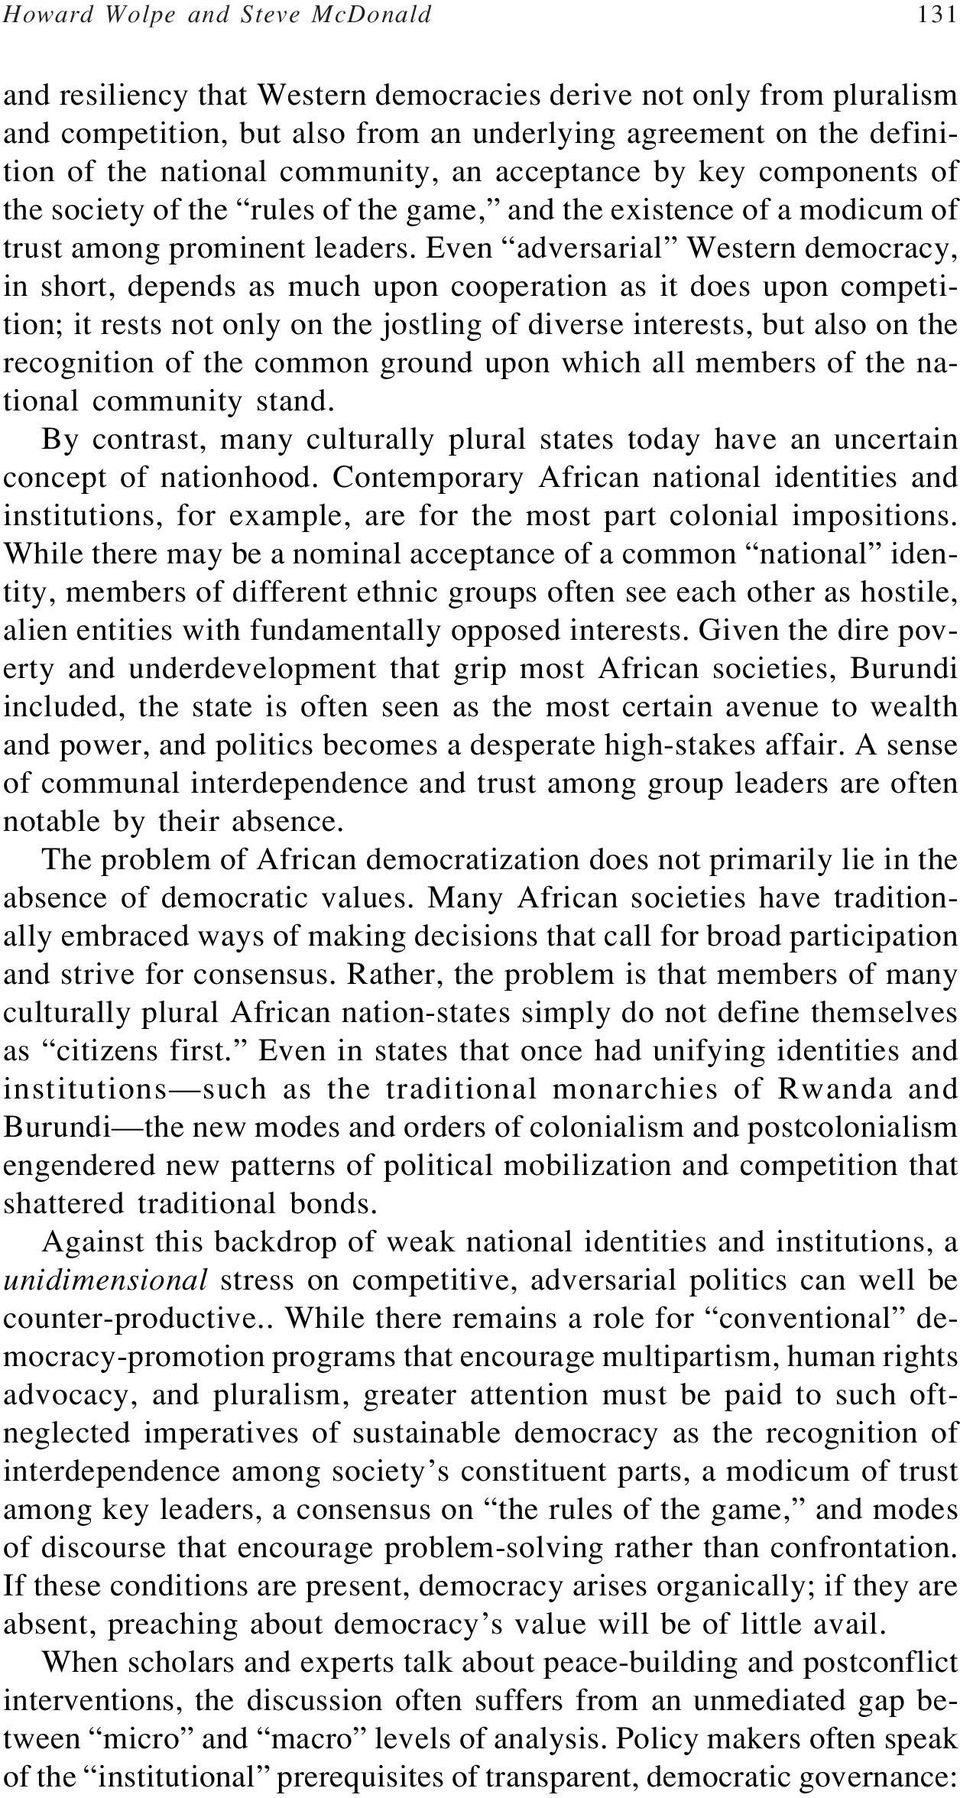 Even adversarial Western democracy, in short, depends as much upon cooperation as it does upon competition; it rests not only on the jostling of diverse interests, but also on the recognition of the